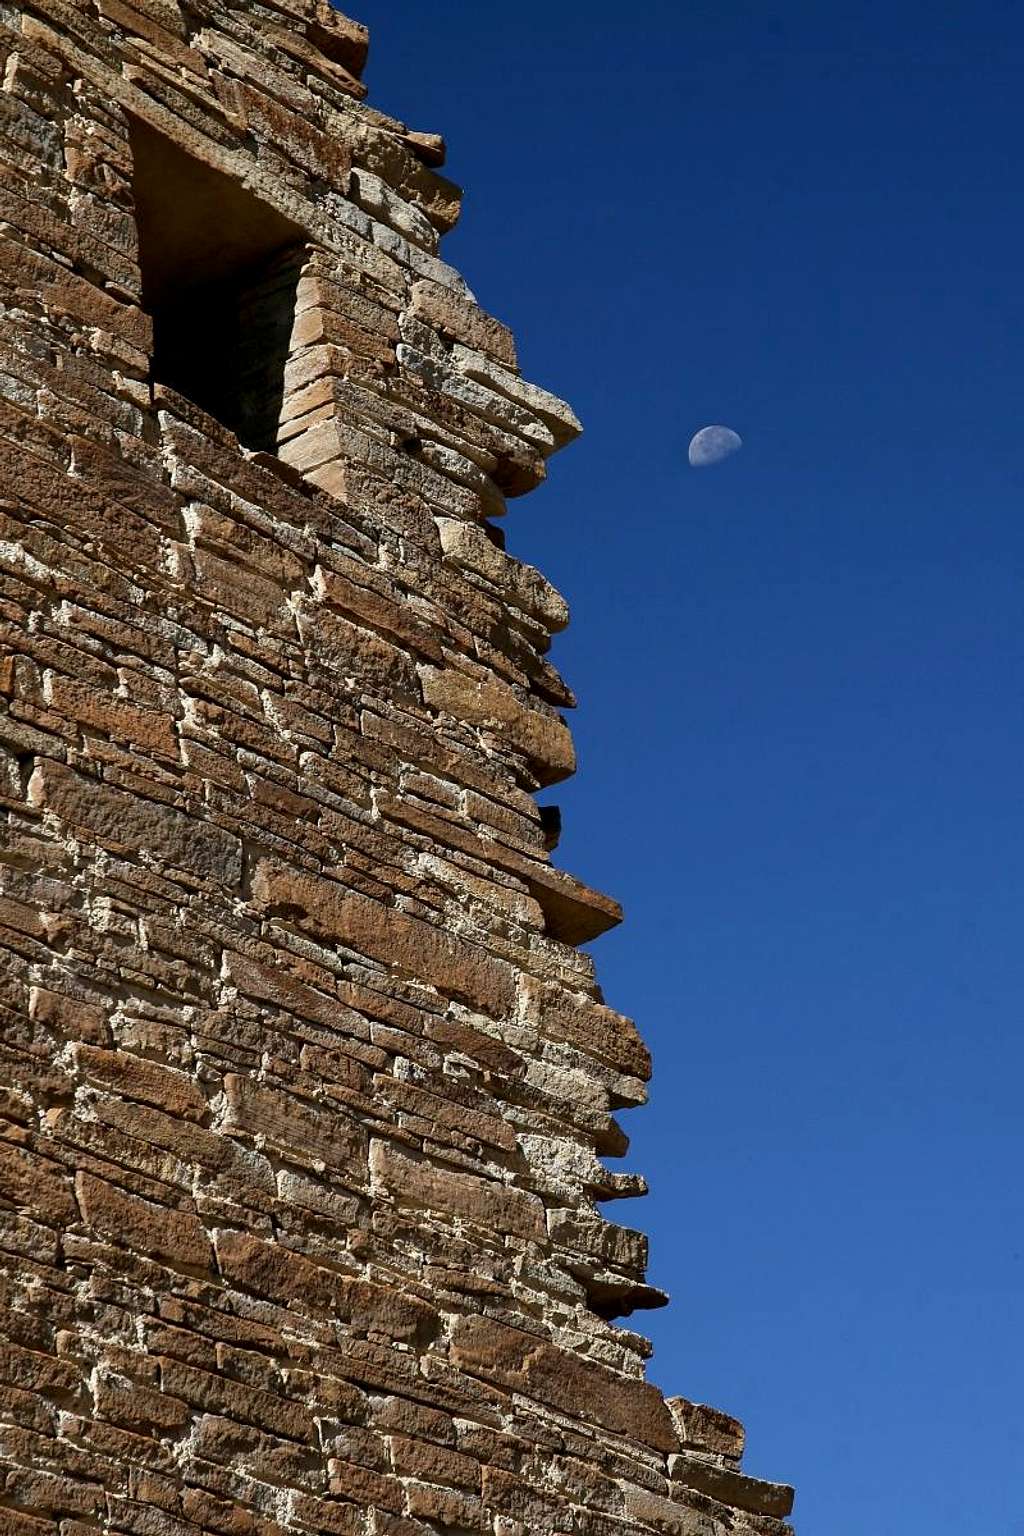 Chaco Ruins and the Moon